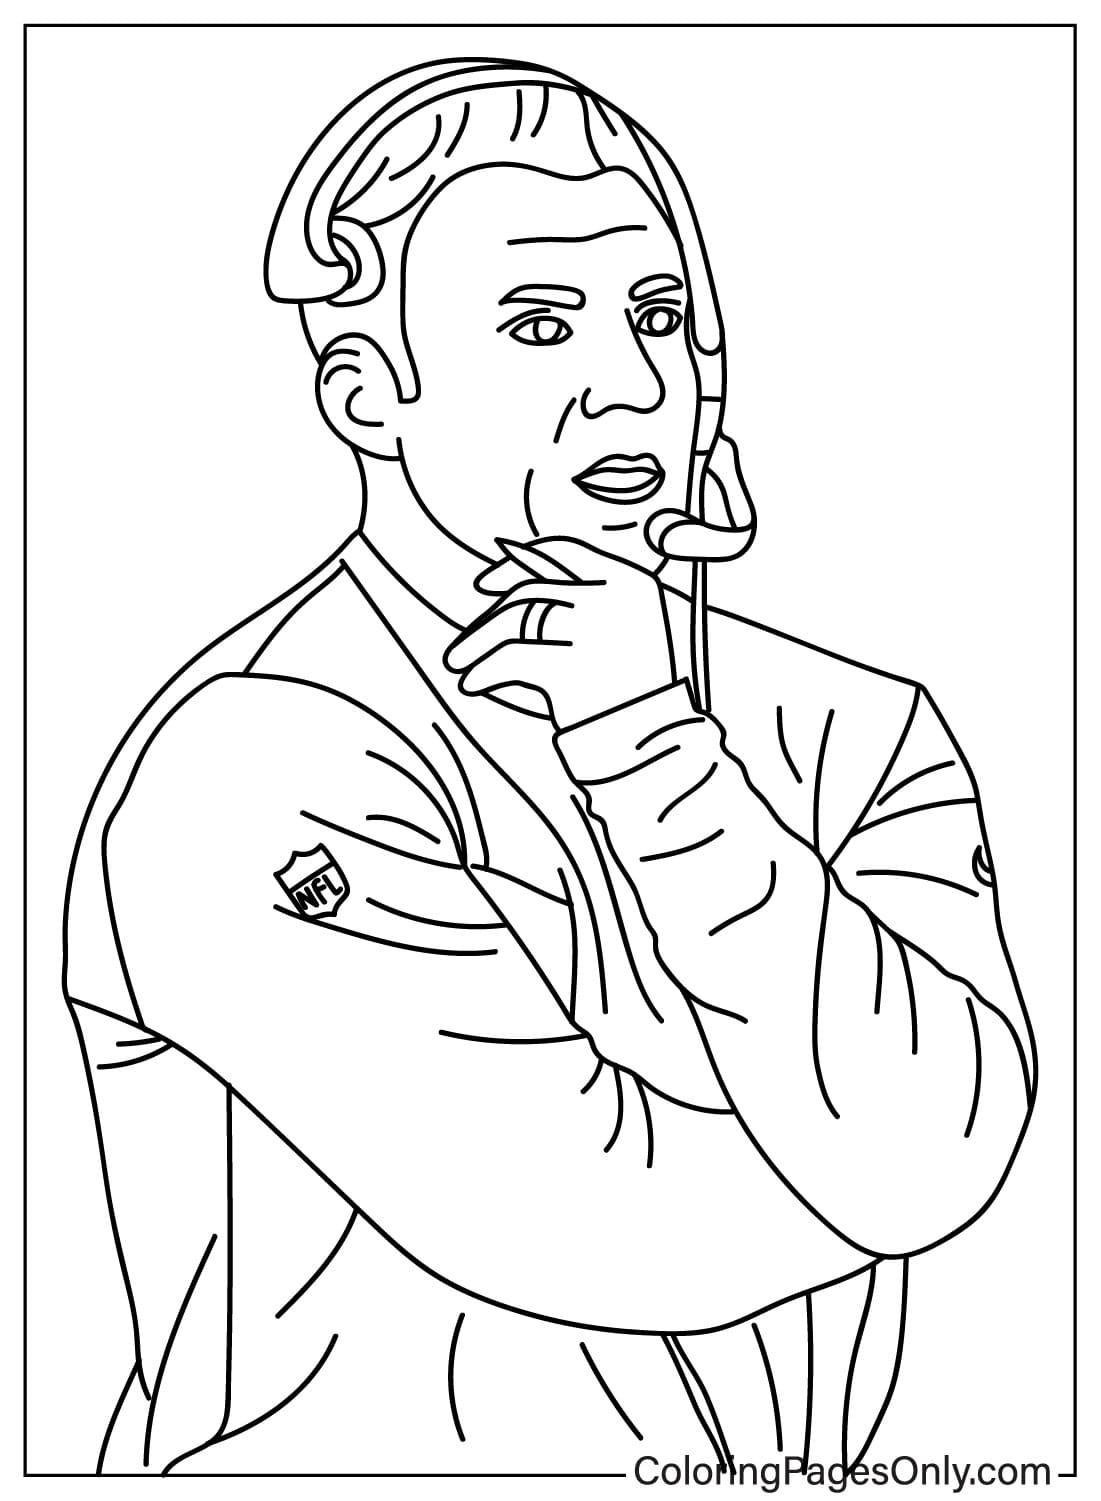 Sean McVay Coloring Page - Free Printable Coloring Pages